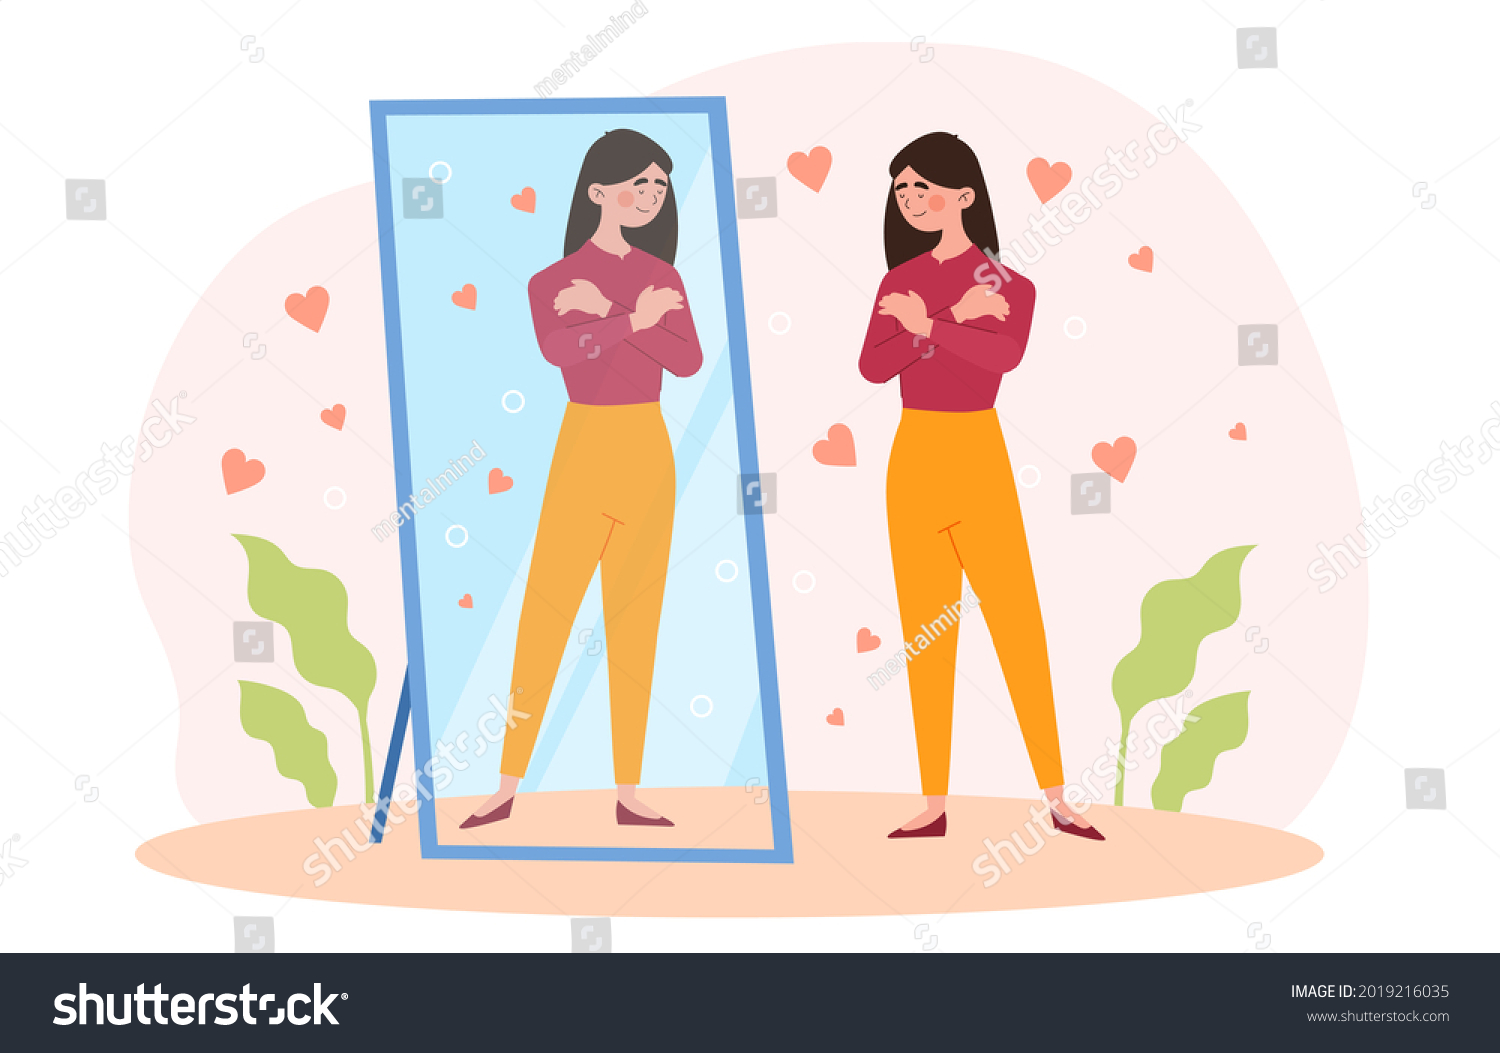 SVG of Happy woman stand before mirror and hug herself, narcissism, positive affirmations, body positive, self care, web banner. Flat cartoon illustration vector concept design isolated on white background svg